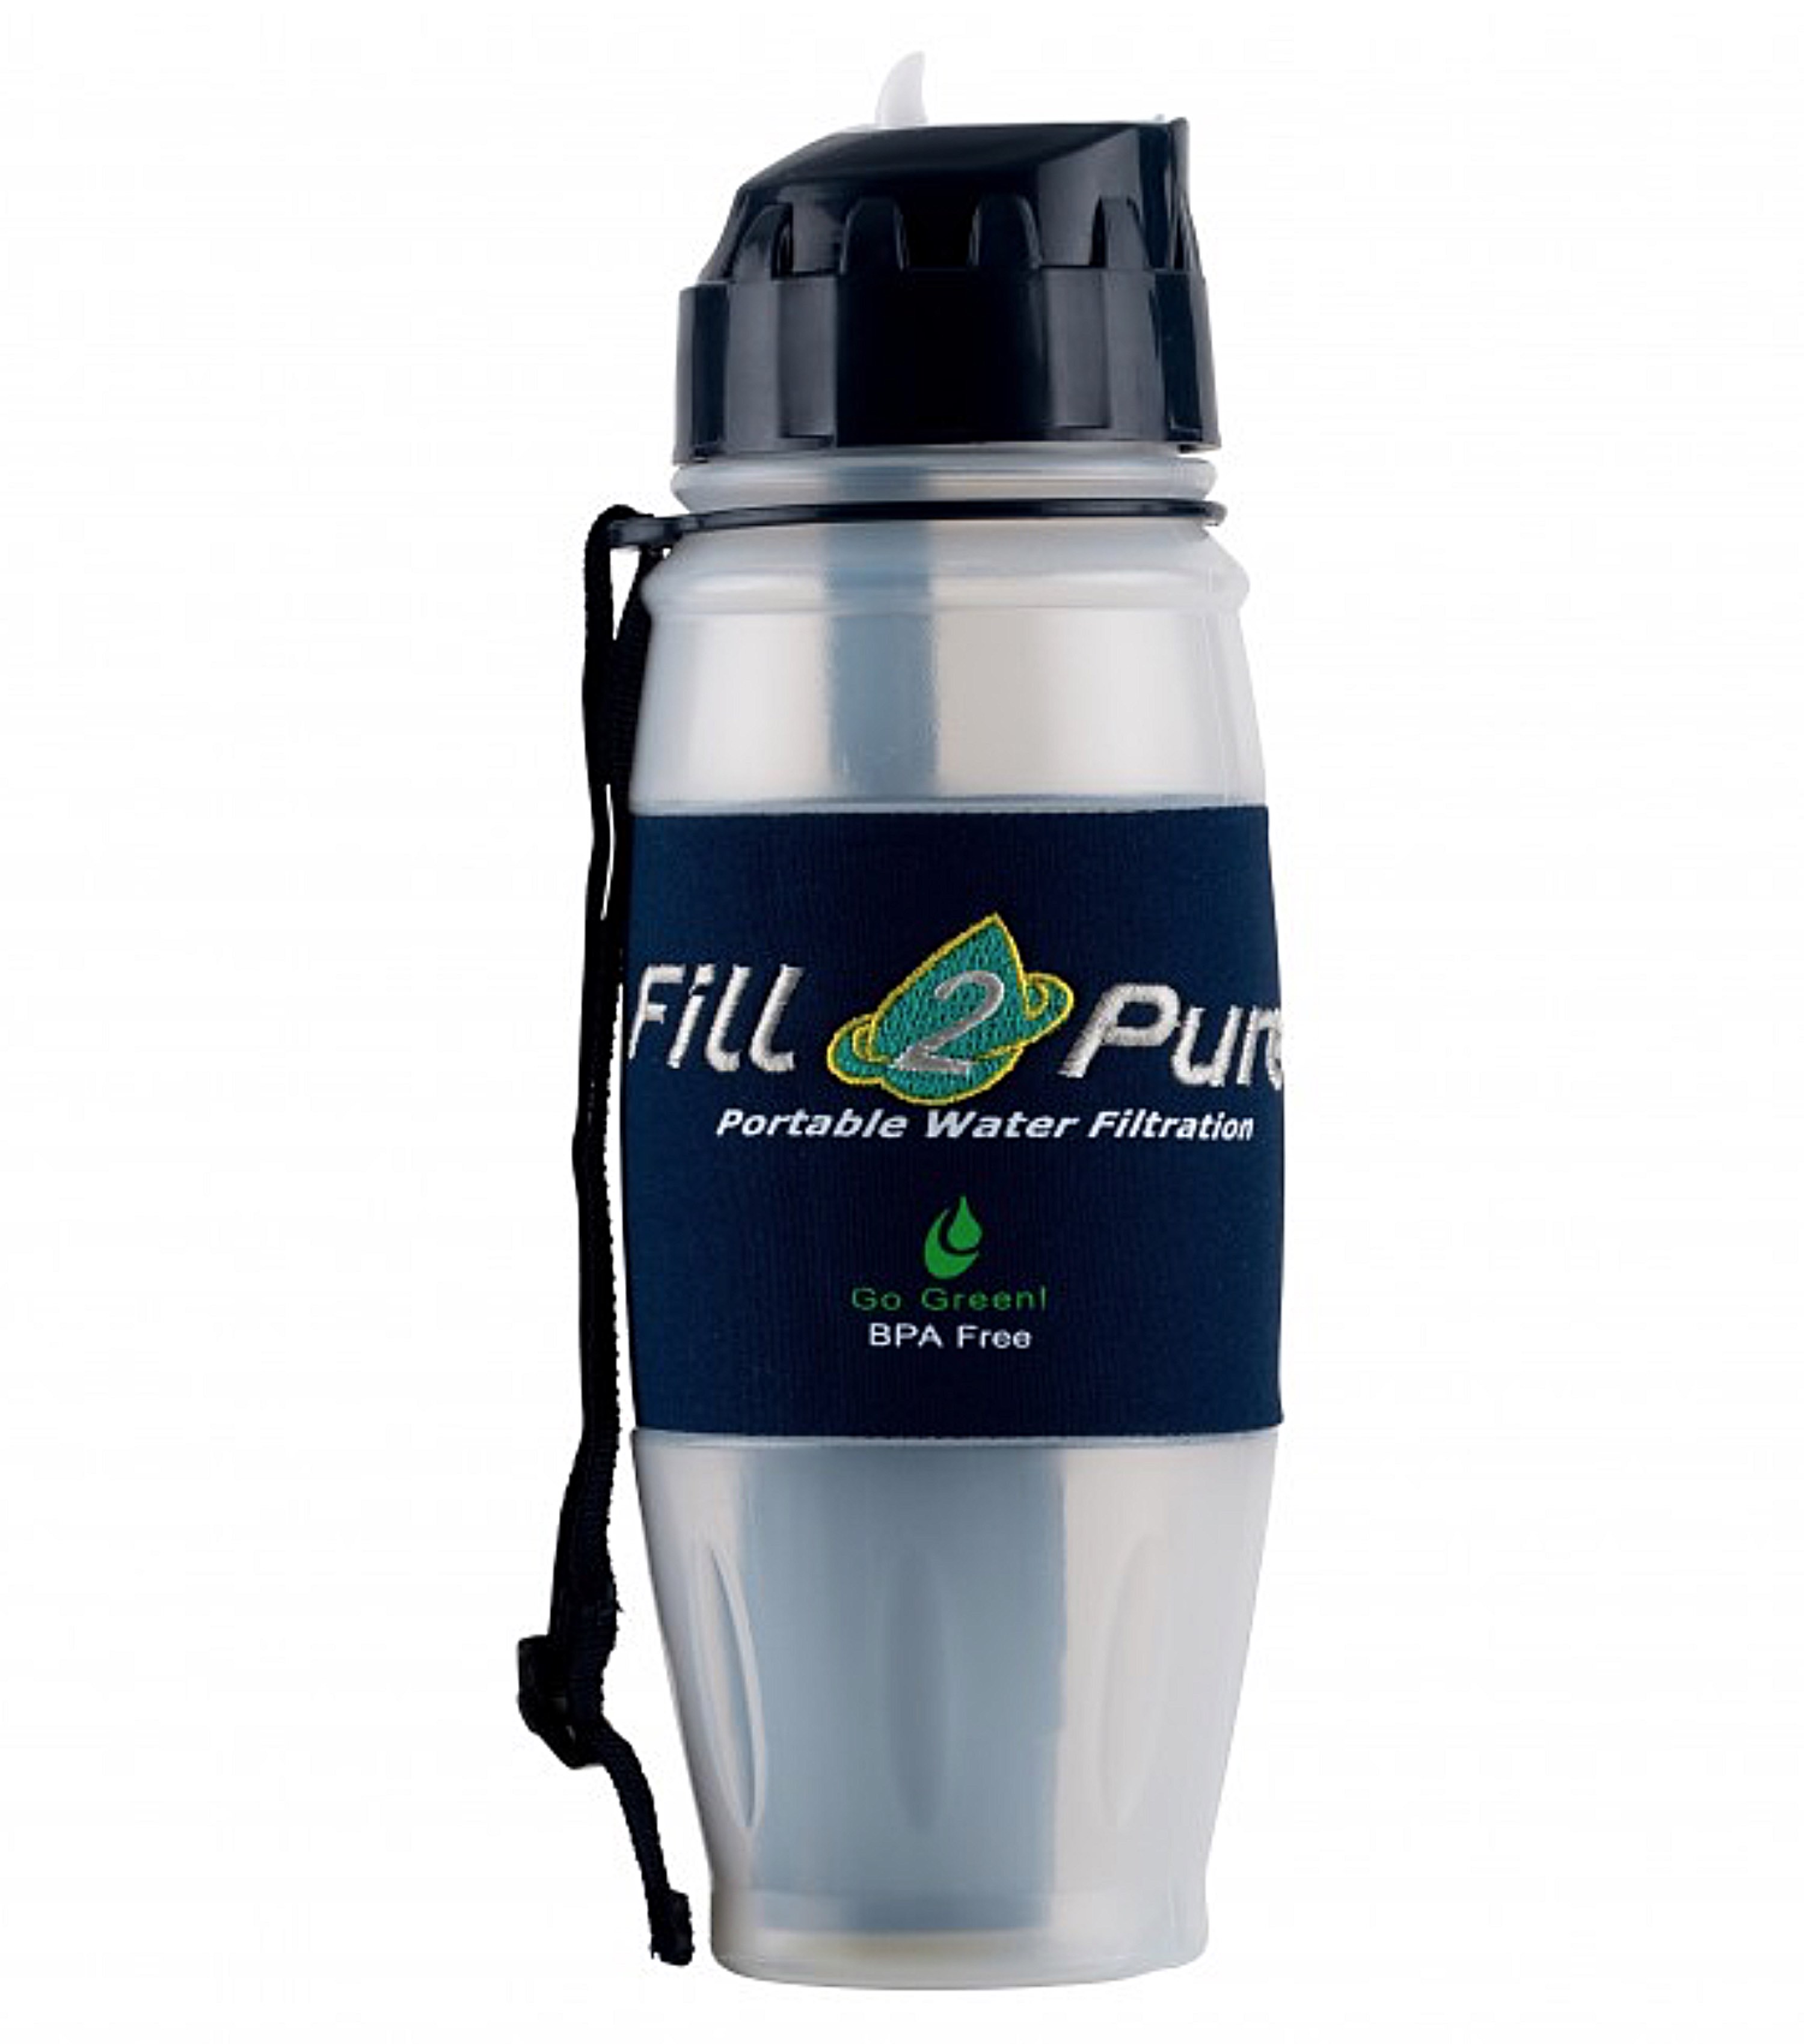 http://www.traveluniverse.com.au/Shared/Images/Product/Fill2Pure-Advanced-Travel-Safe-Filter-Water-Bottle-800ml/DC2600-2.jpg